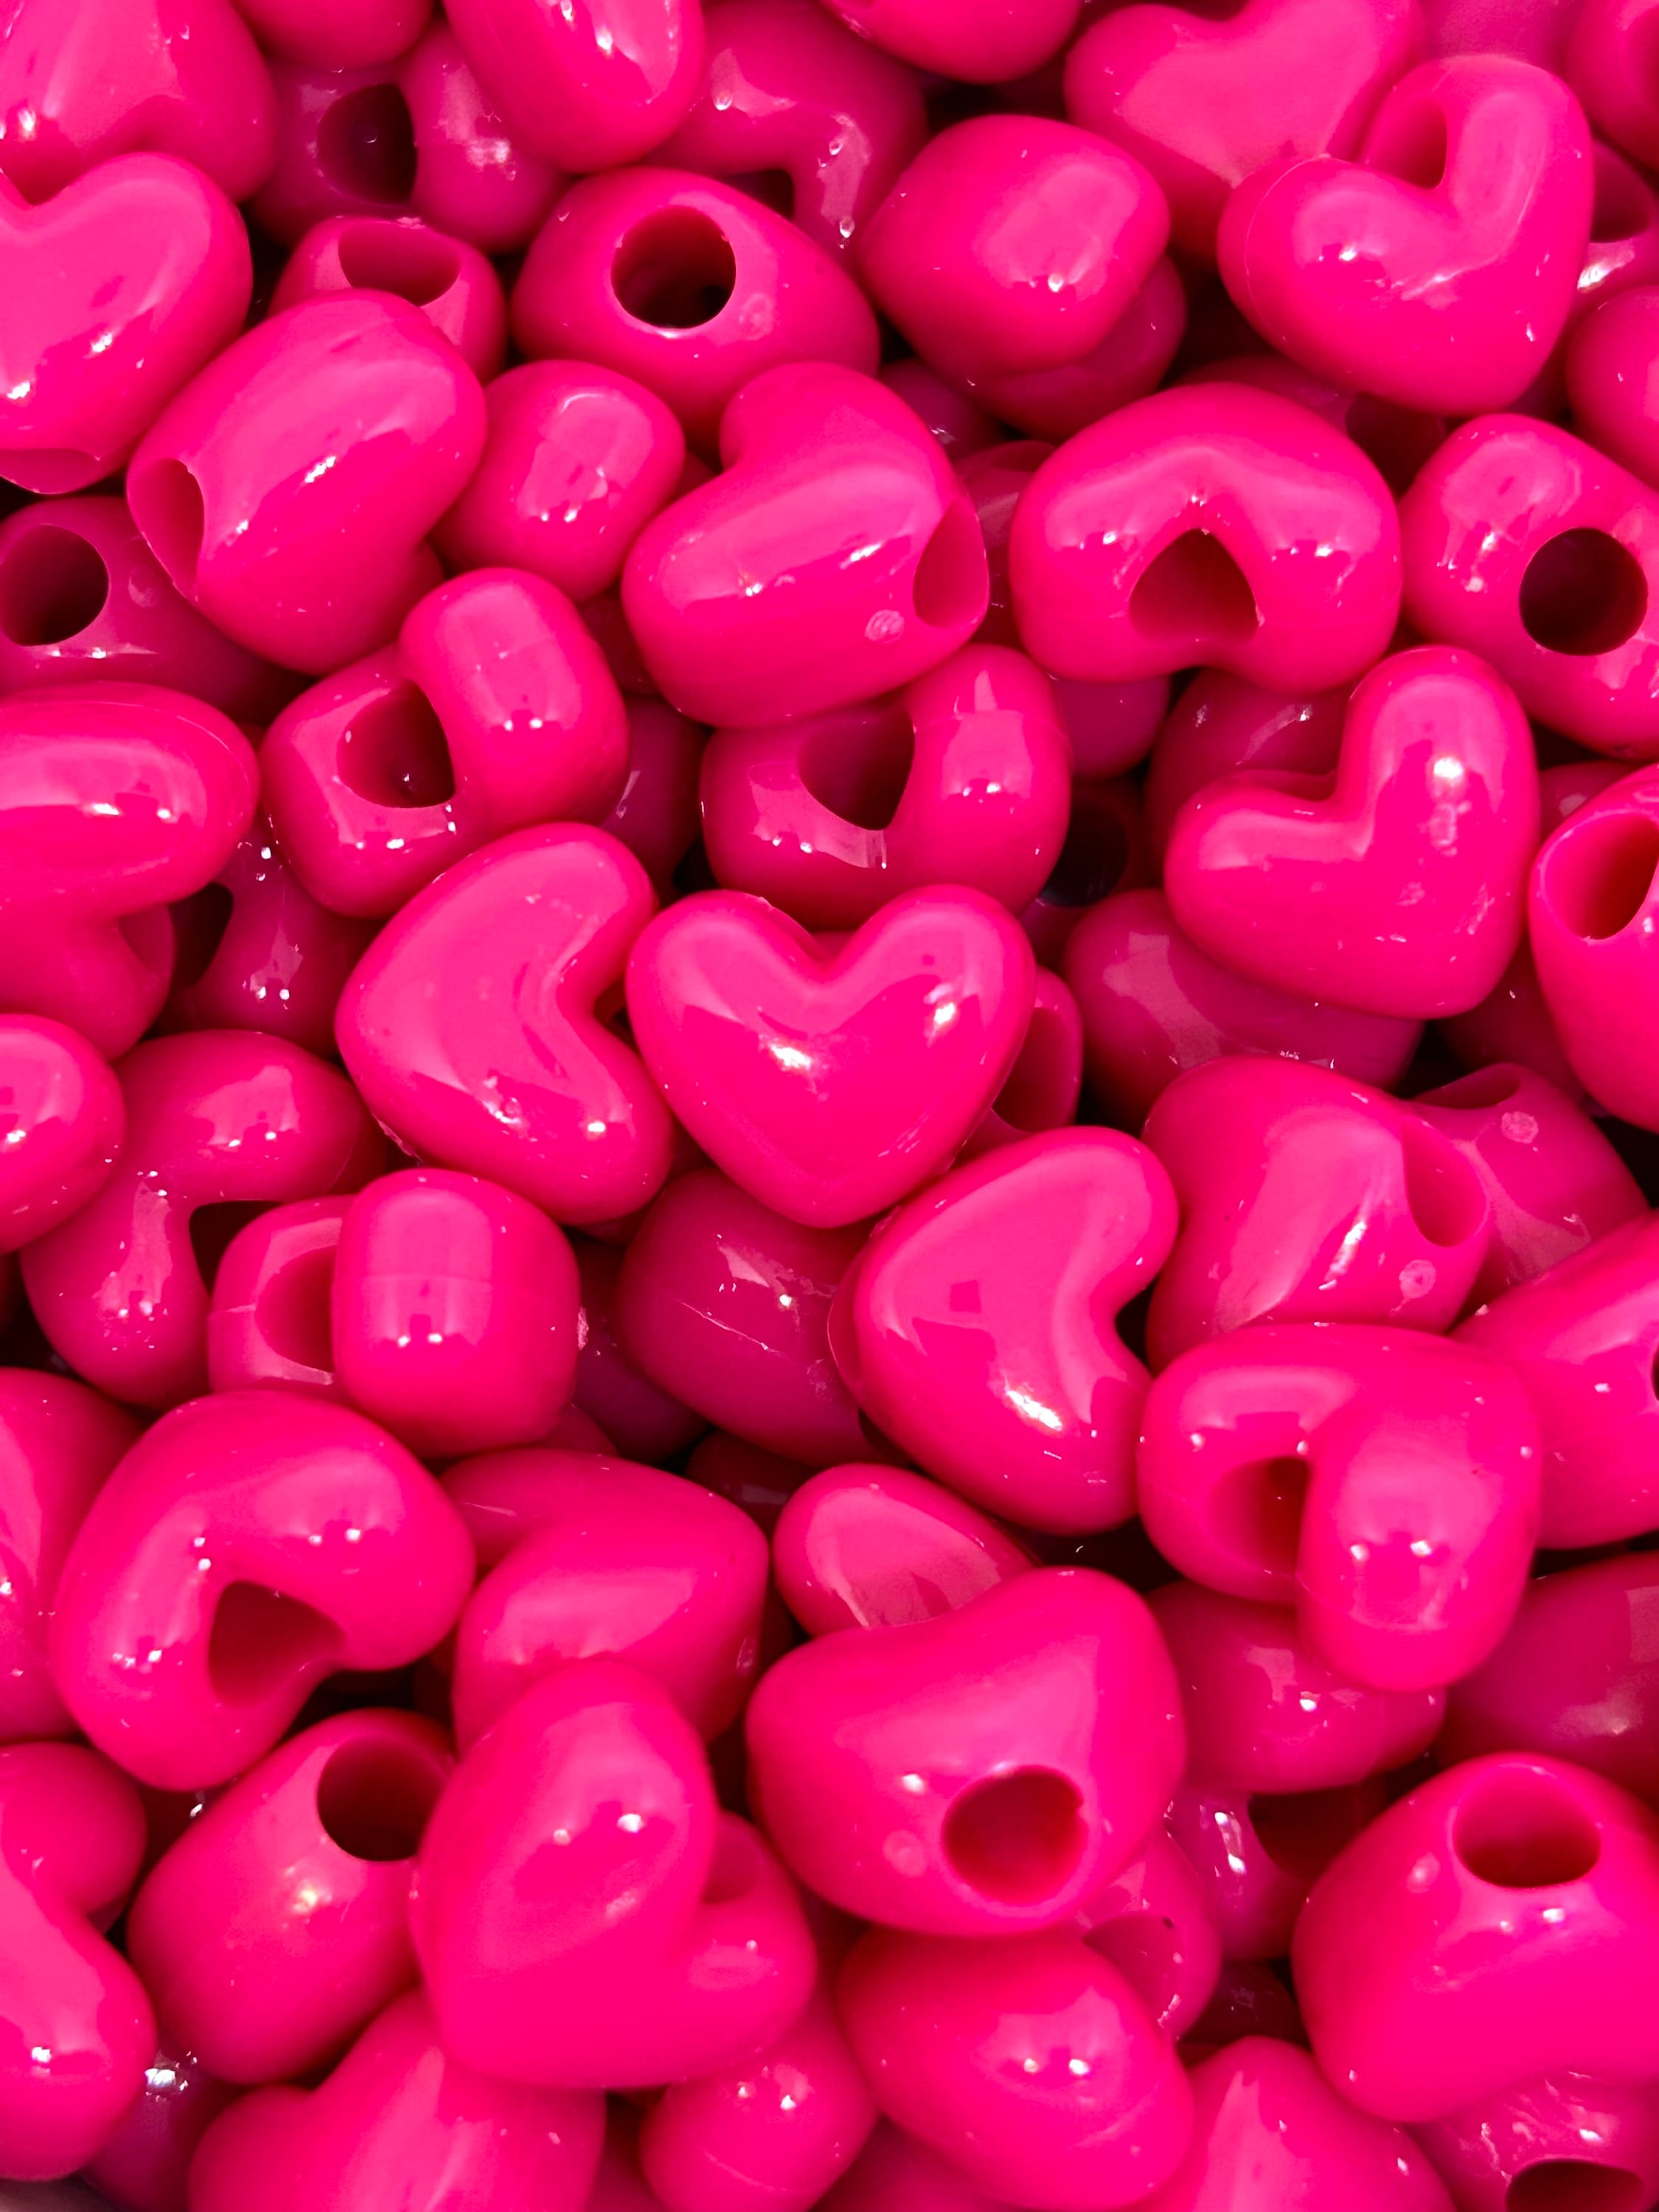 Transparent Pink Heart Pony Bead 20 Pieces Great For Valentines Day!